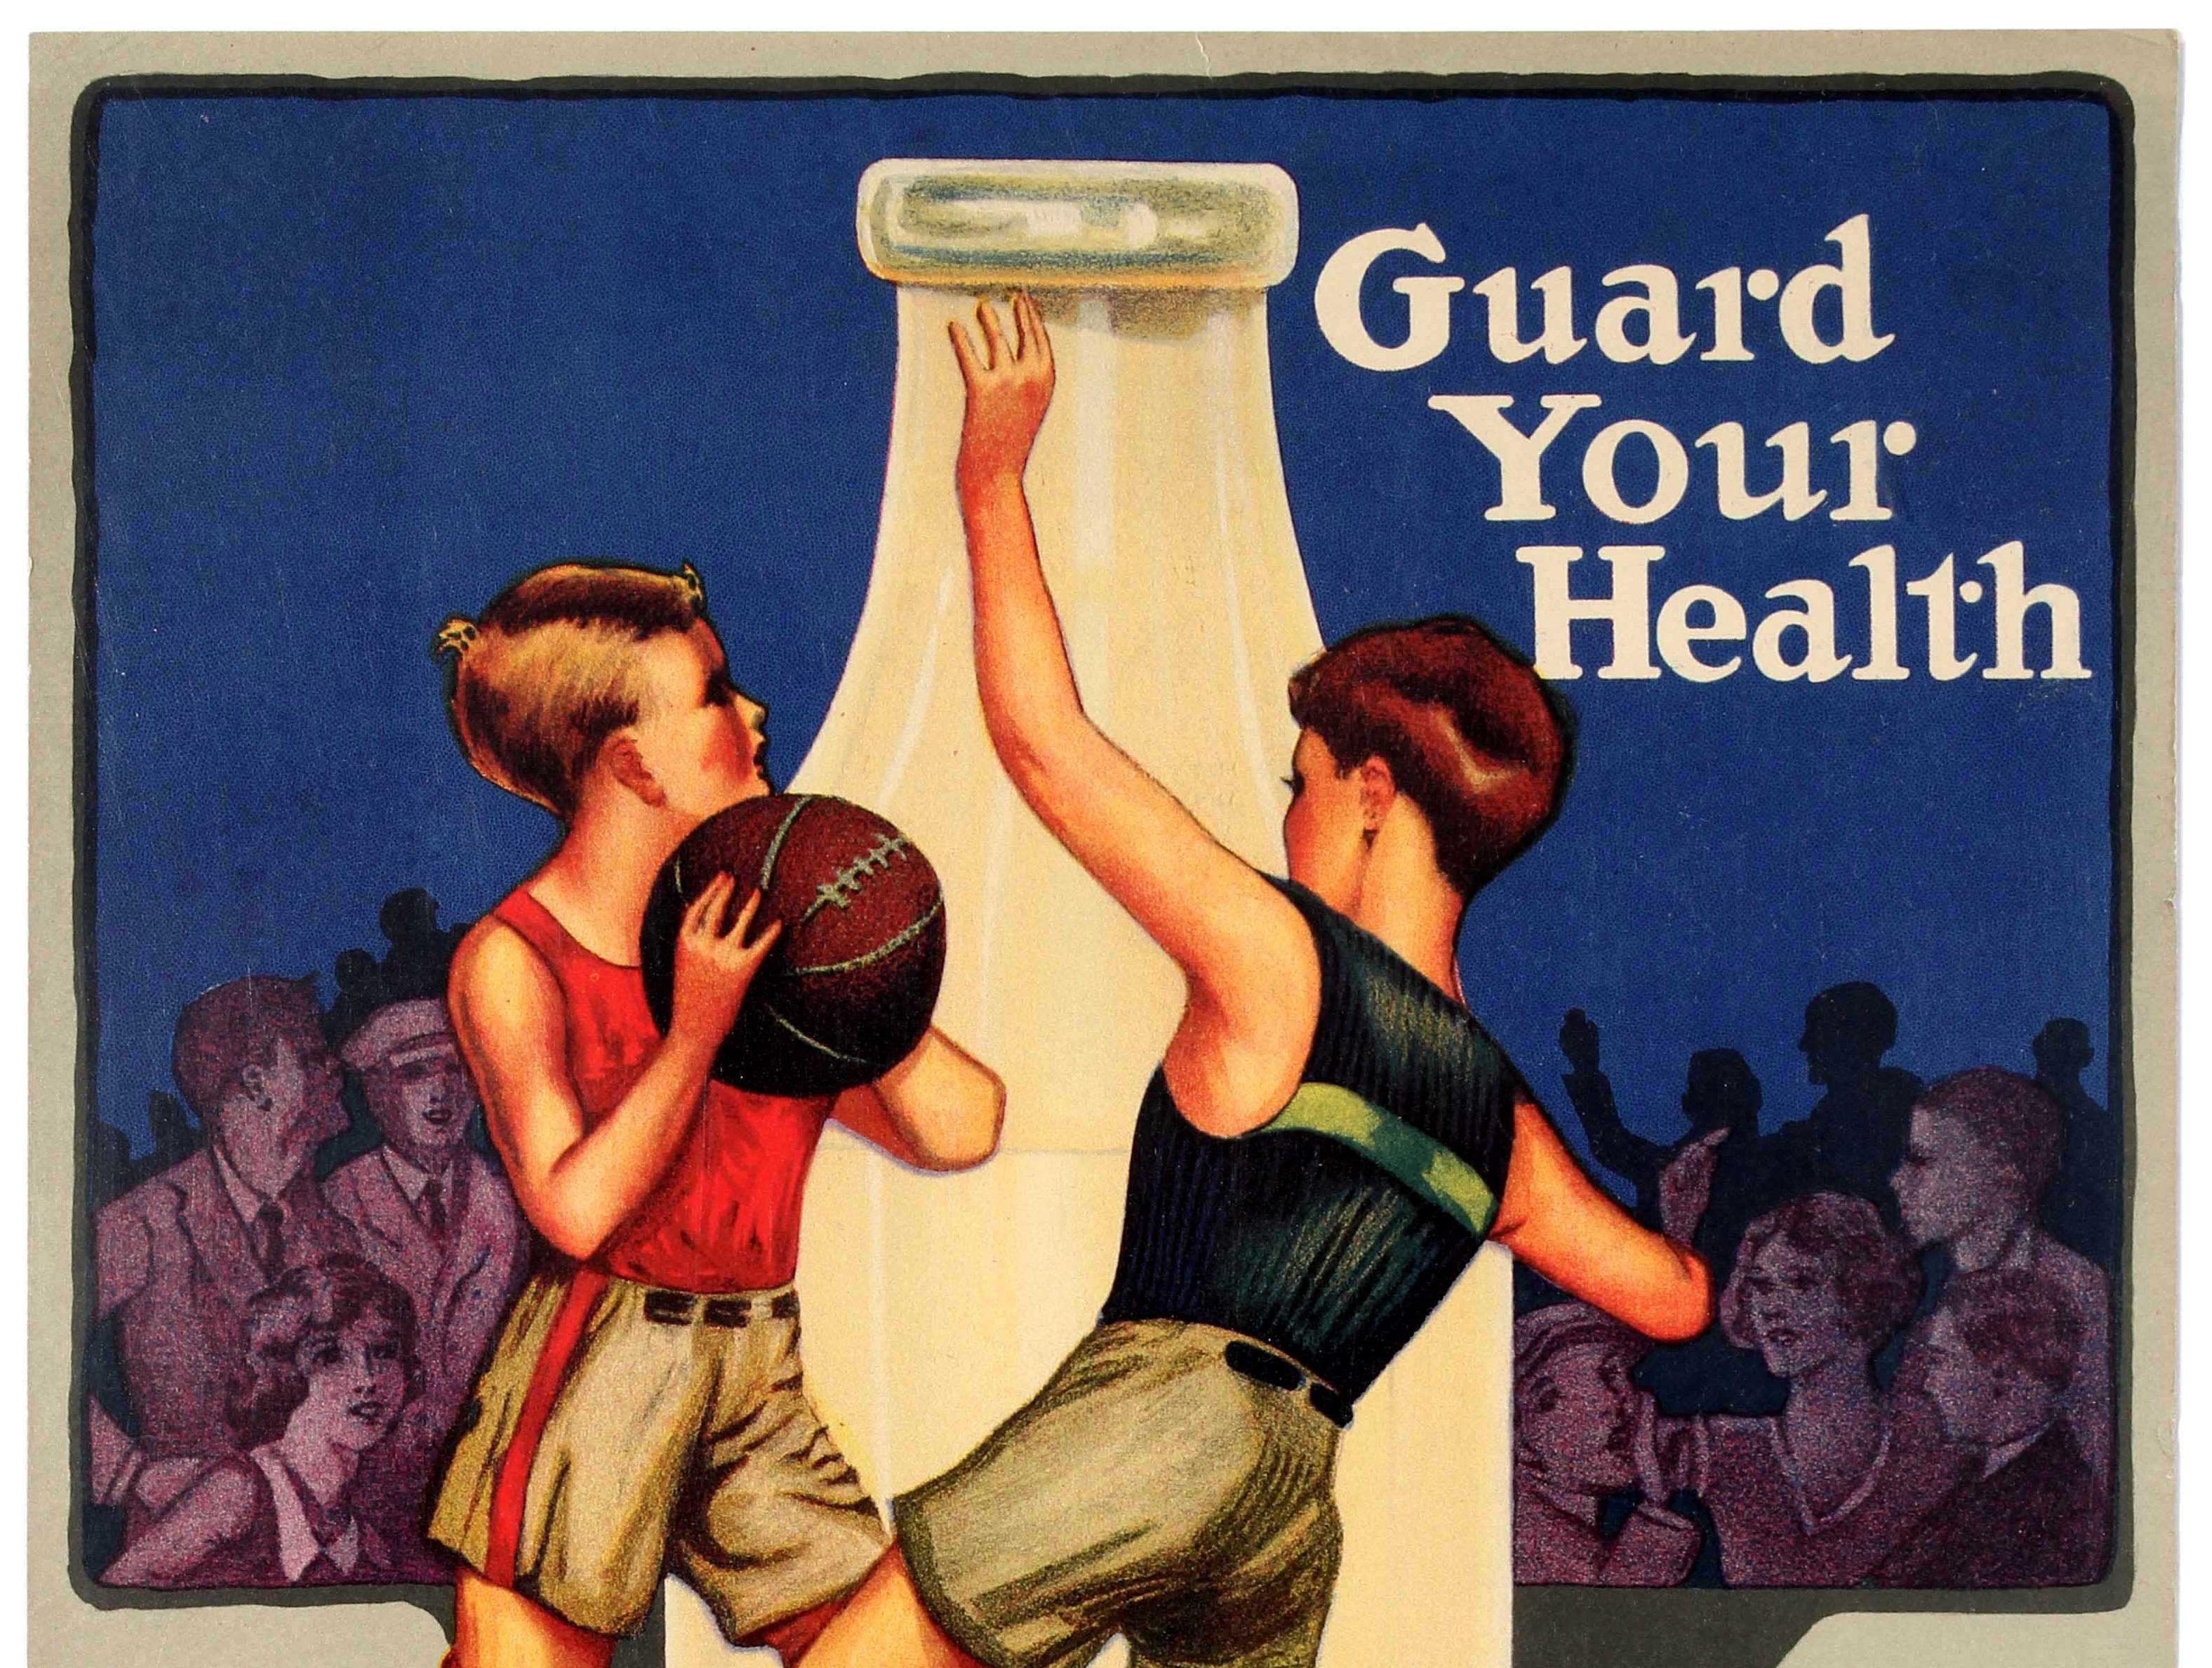 Original vintage advertising poster - Guard Your Health Milk Helps You Win! - featuring a fantastic illustration of two young boys playing a game of basketball next to a giant bottle of milk with a crowd of people looking on in the background.